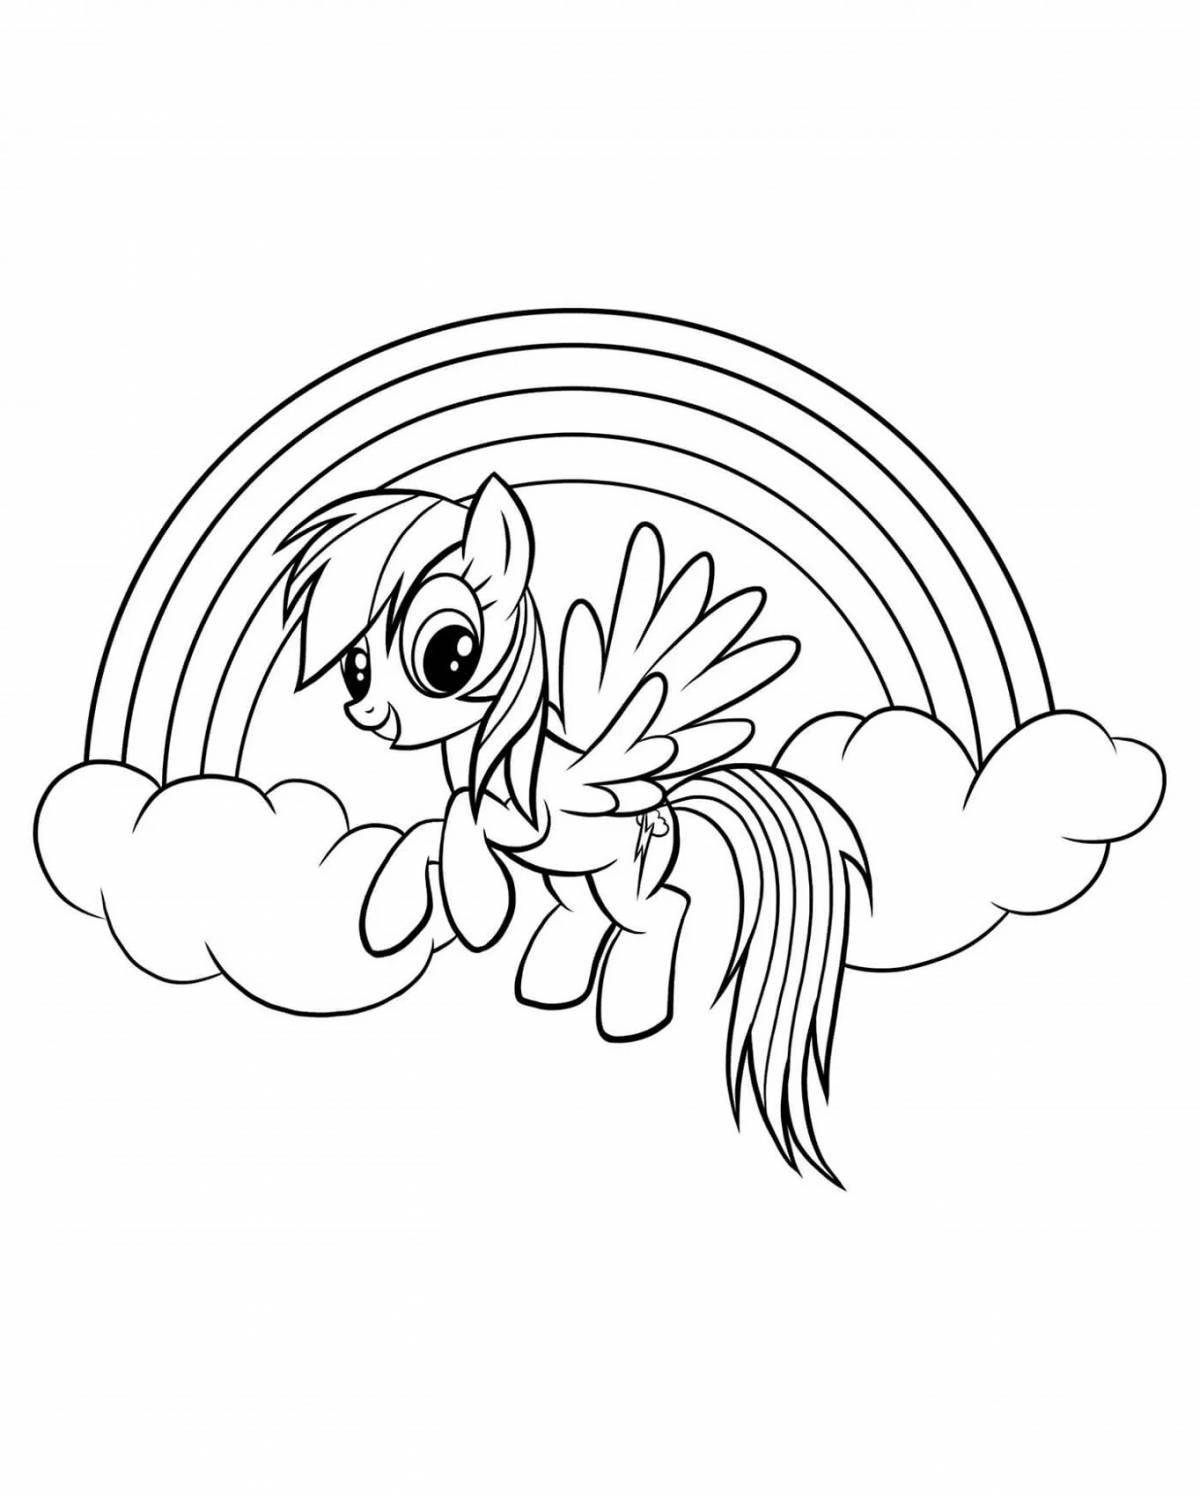 Lovely ramball dash coloring page